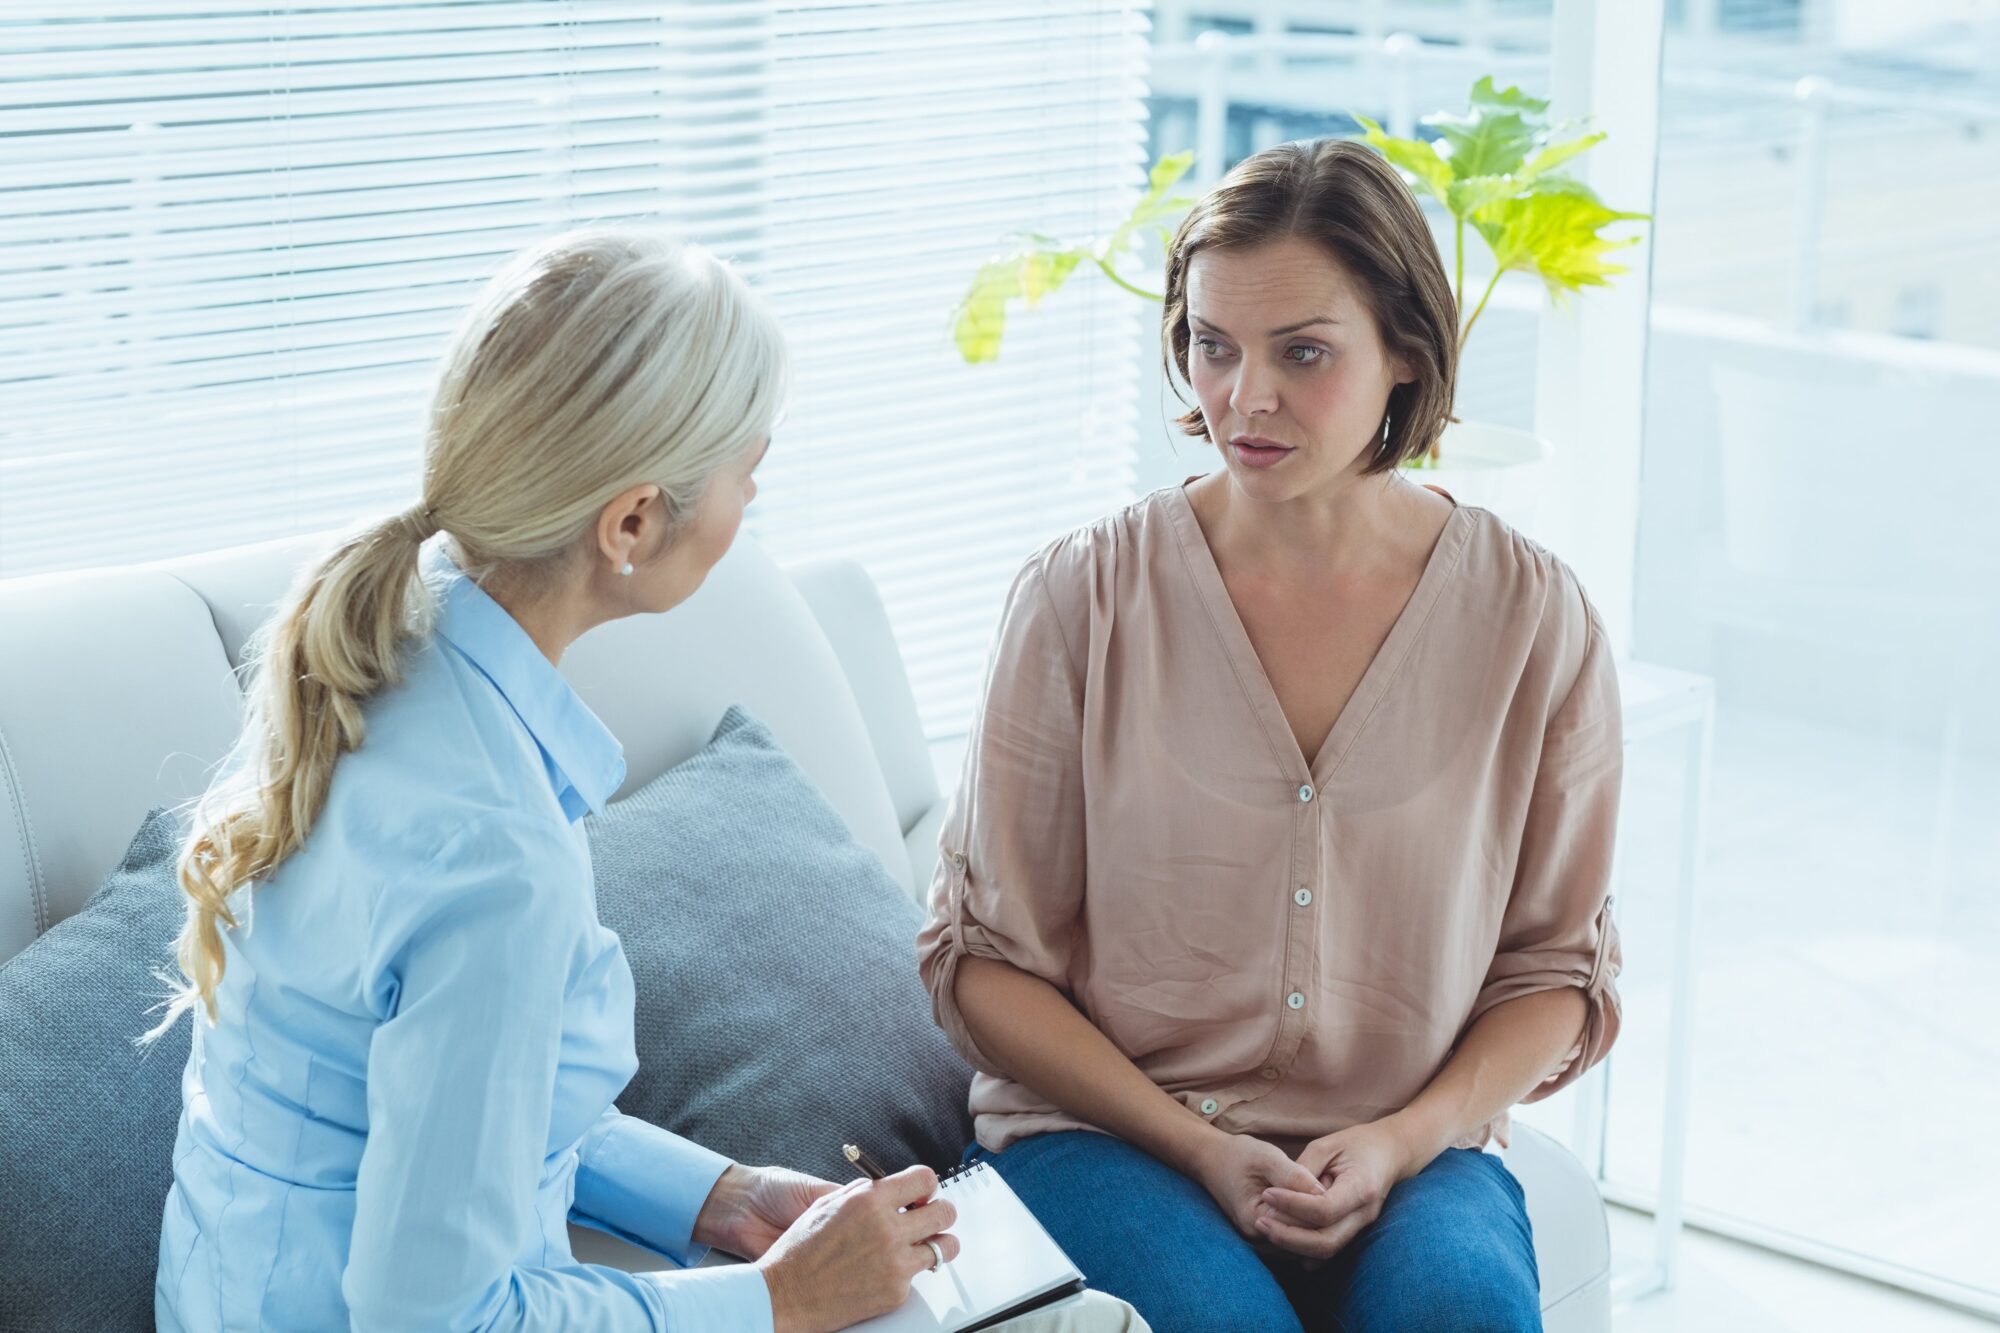 Upset woman talking with counselor